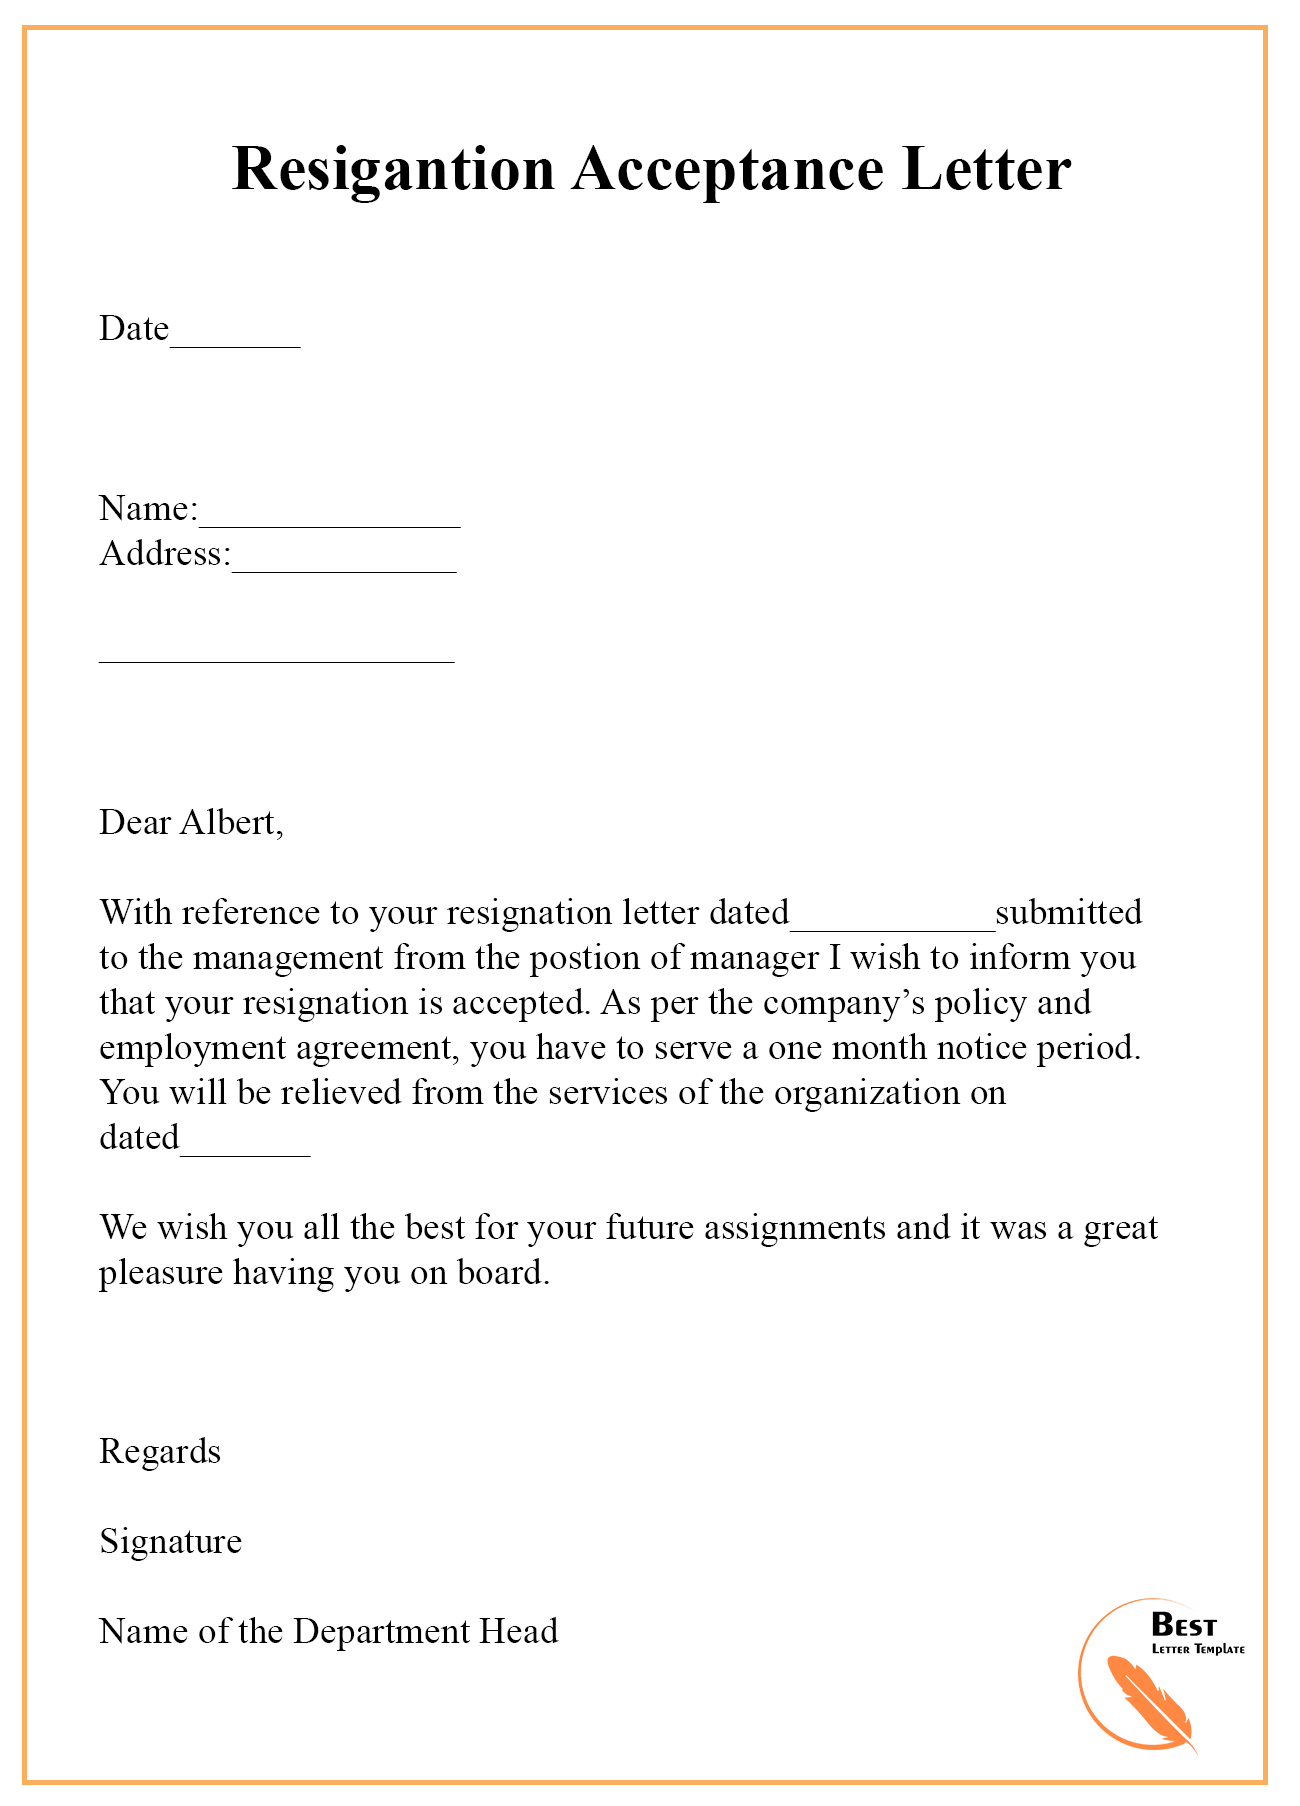 9+ Resignation Acceptance Letter Template [Examples Within Certificate Of Acceptance Template